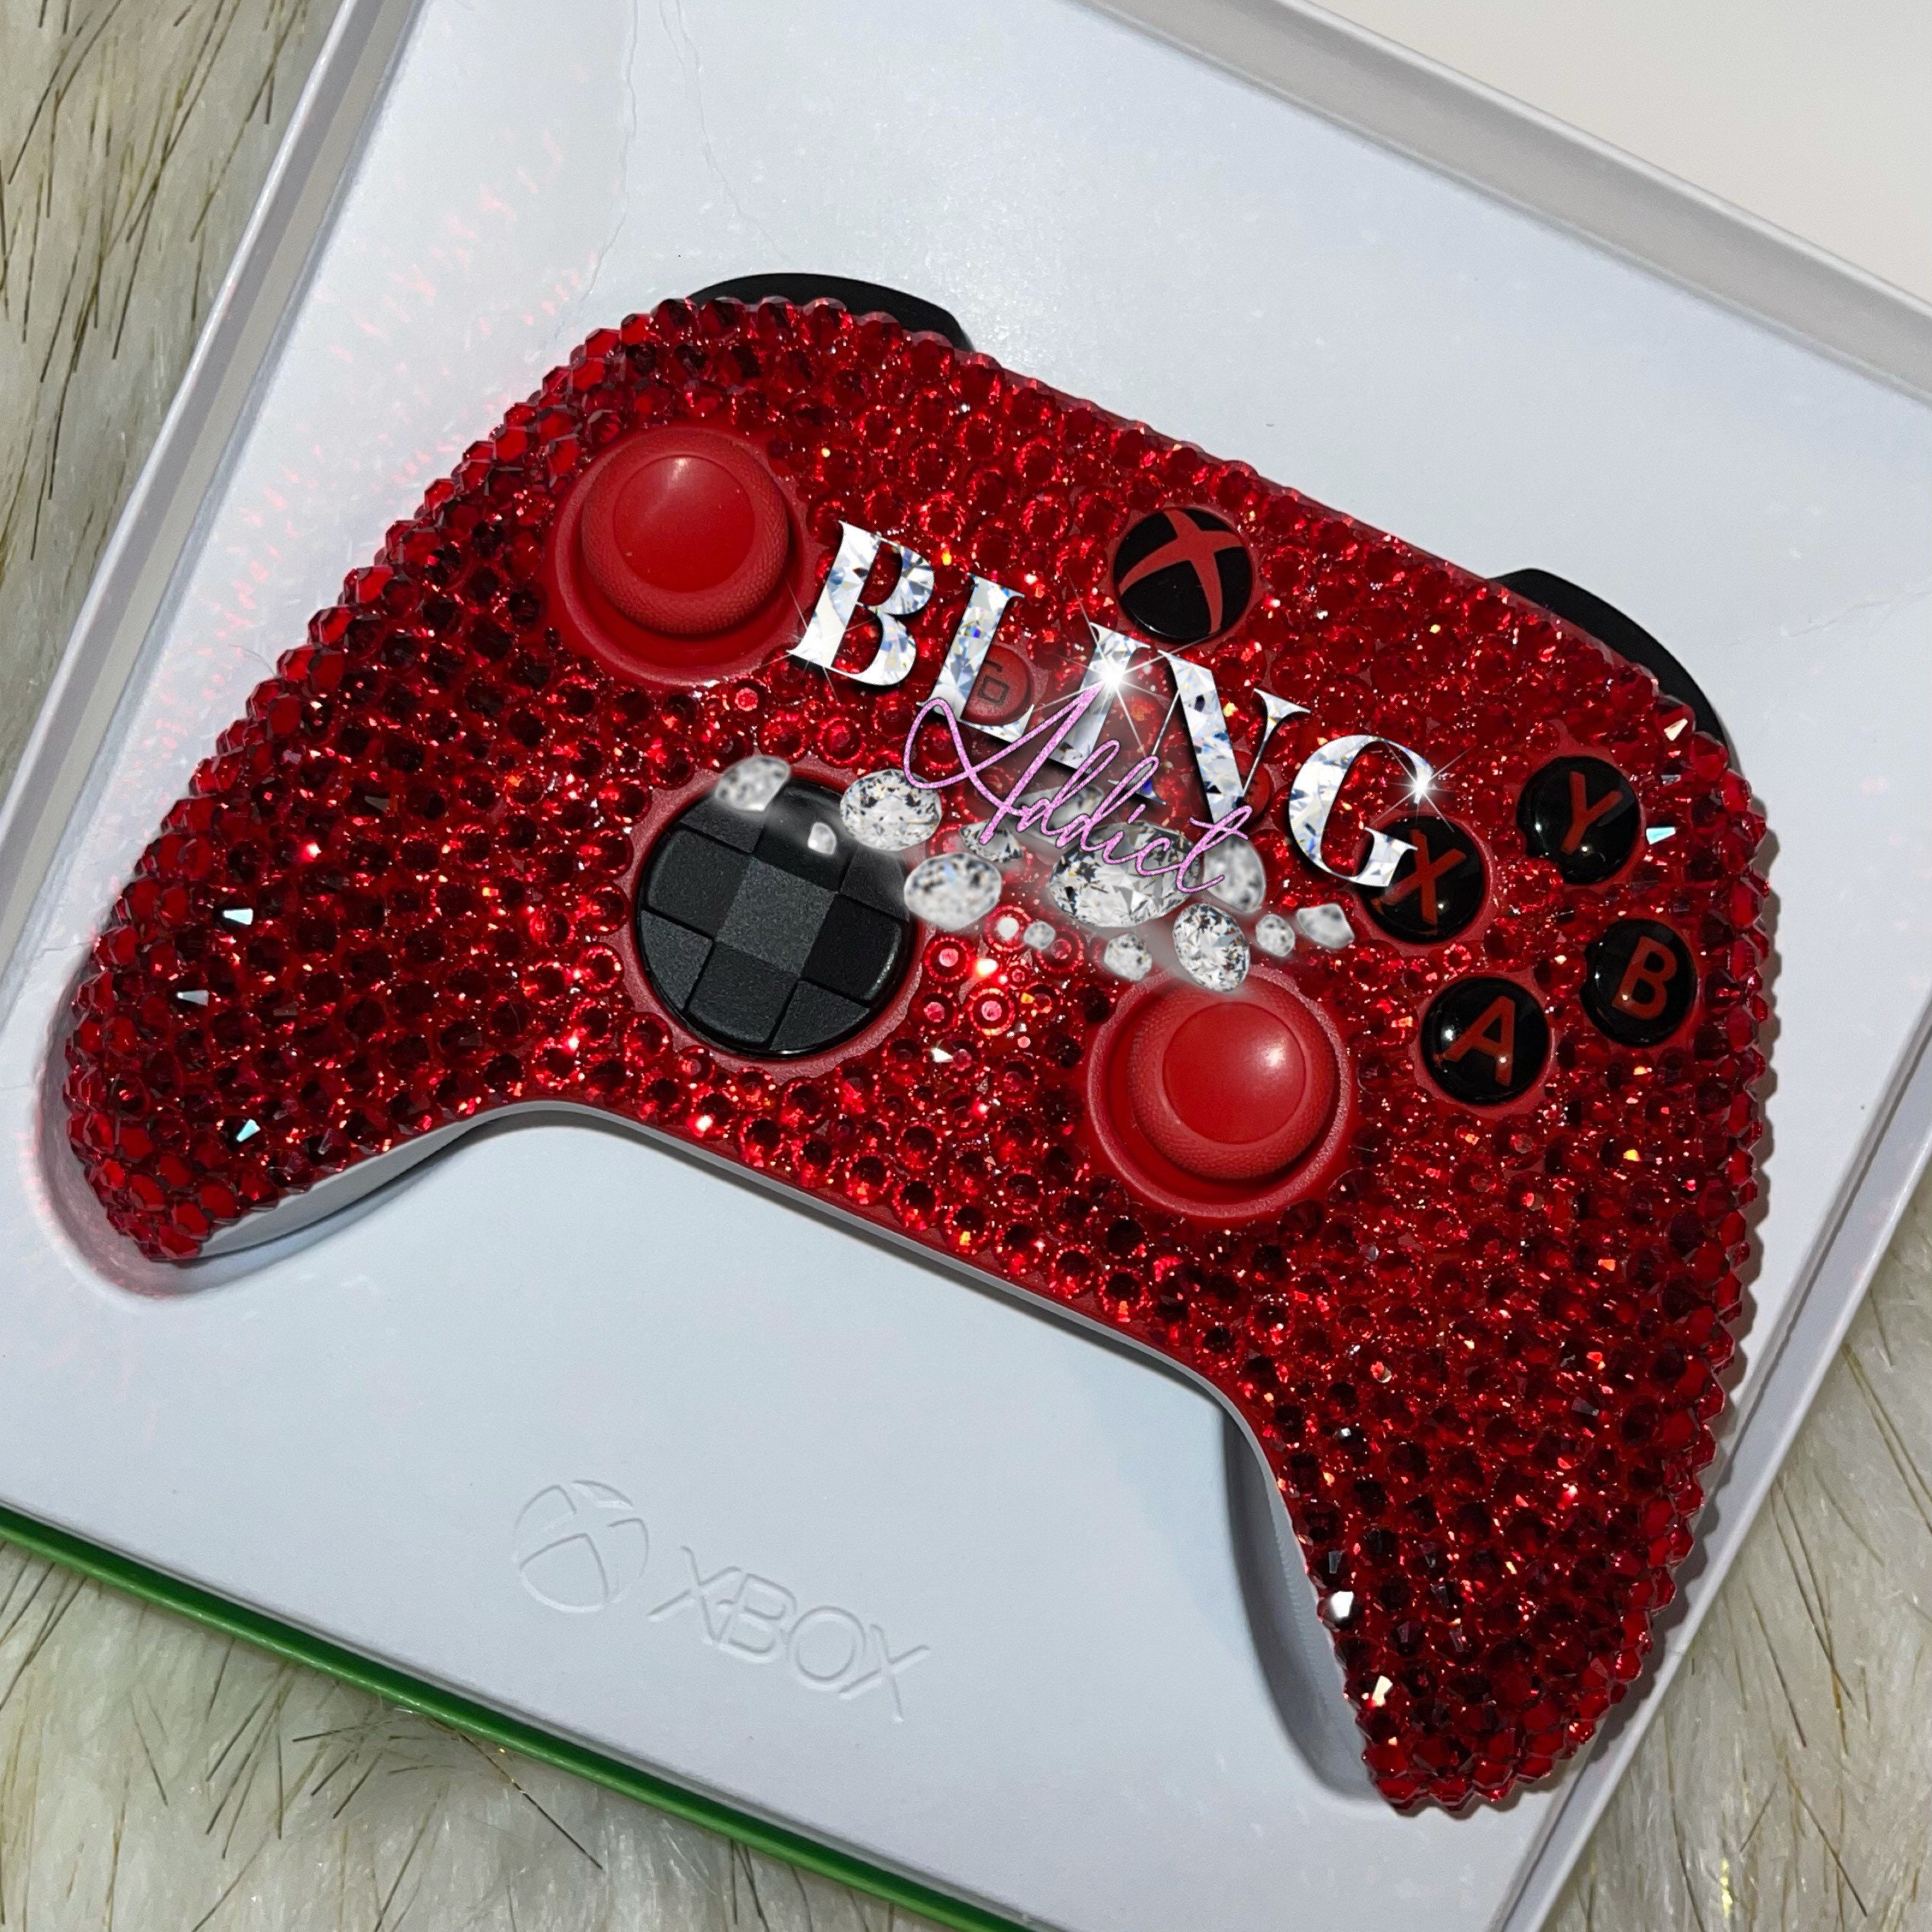 Custom Handmade Bling,glam Rhinestone Gems, Crystal Sparkly, Bedazzled  Girly Gamer Girl, Xbox/ps4,video Game Electronic Wireless Controllers 